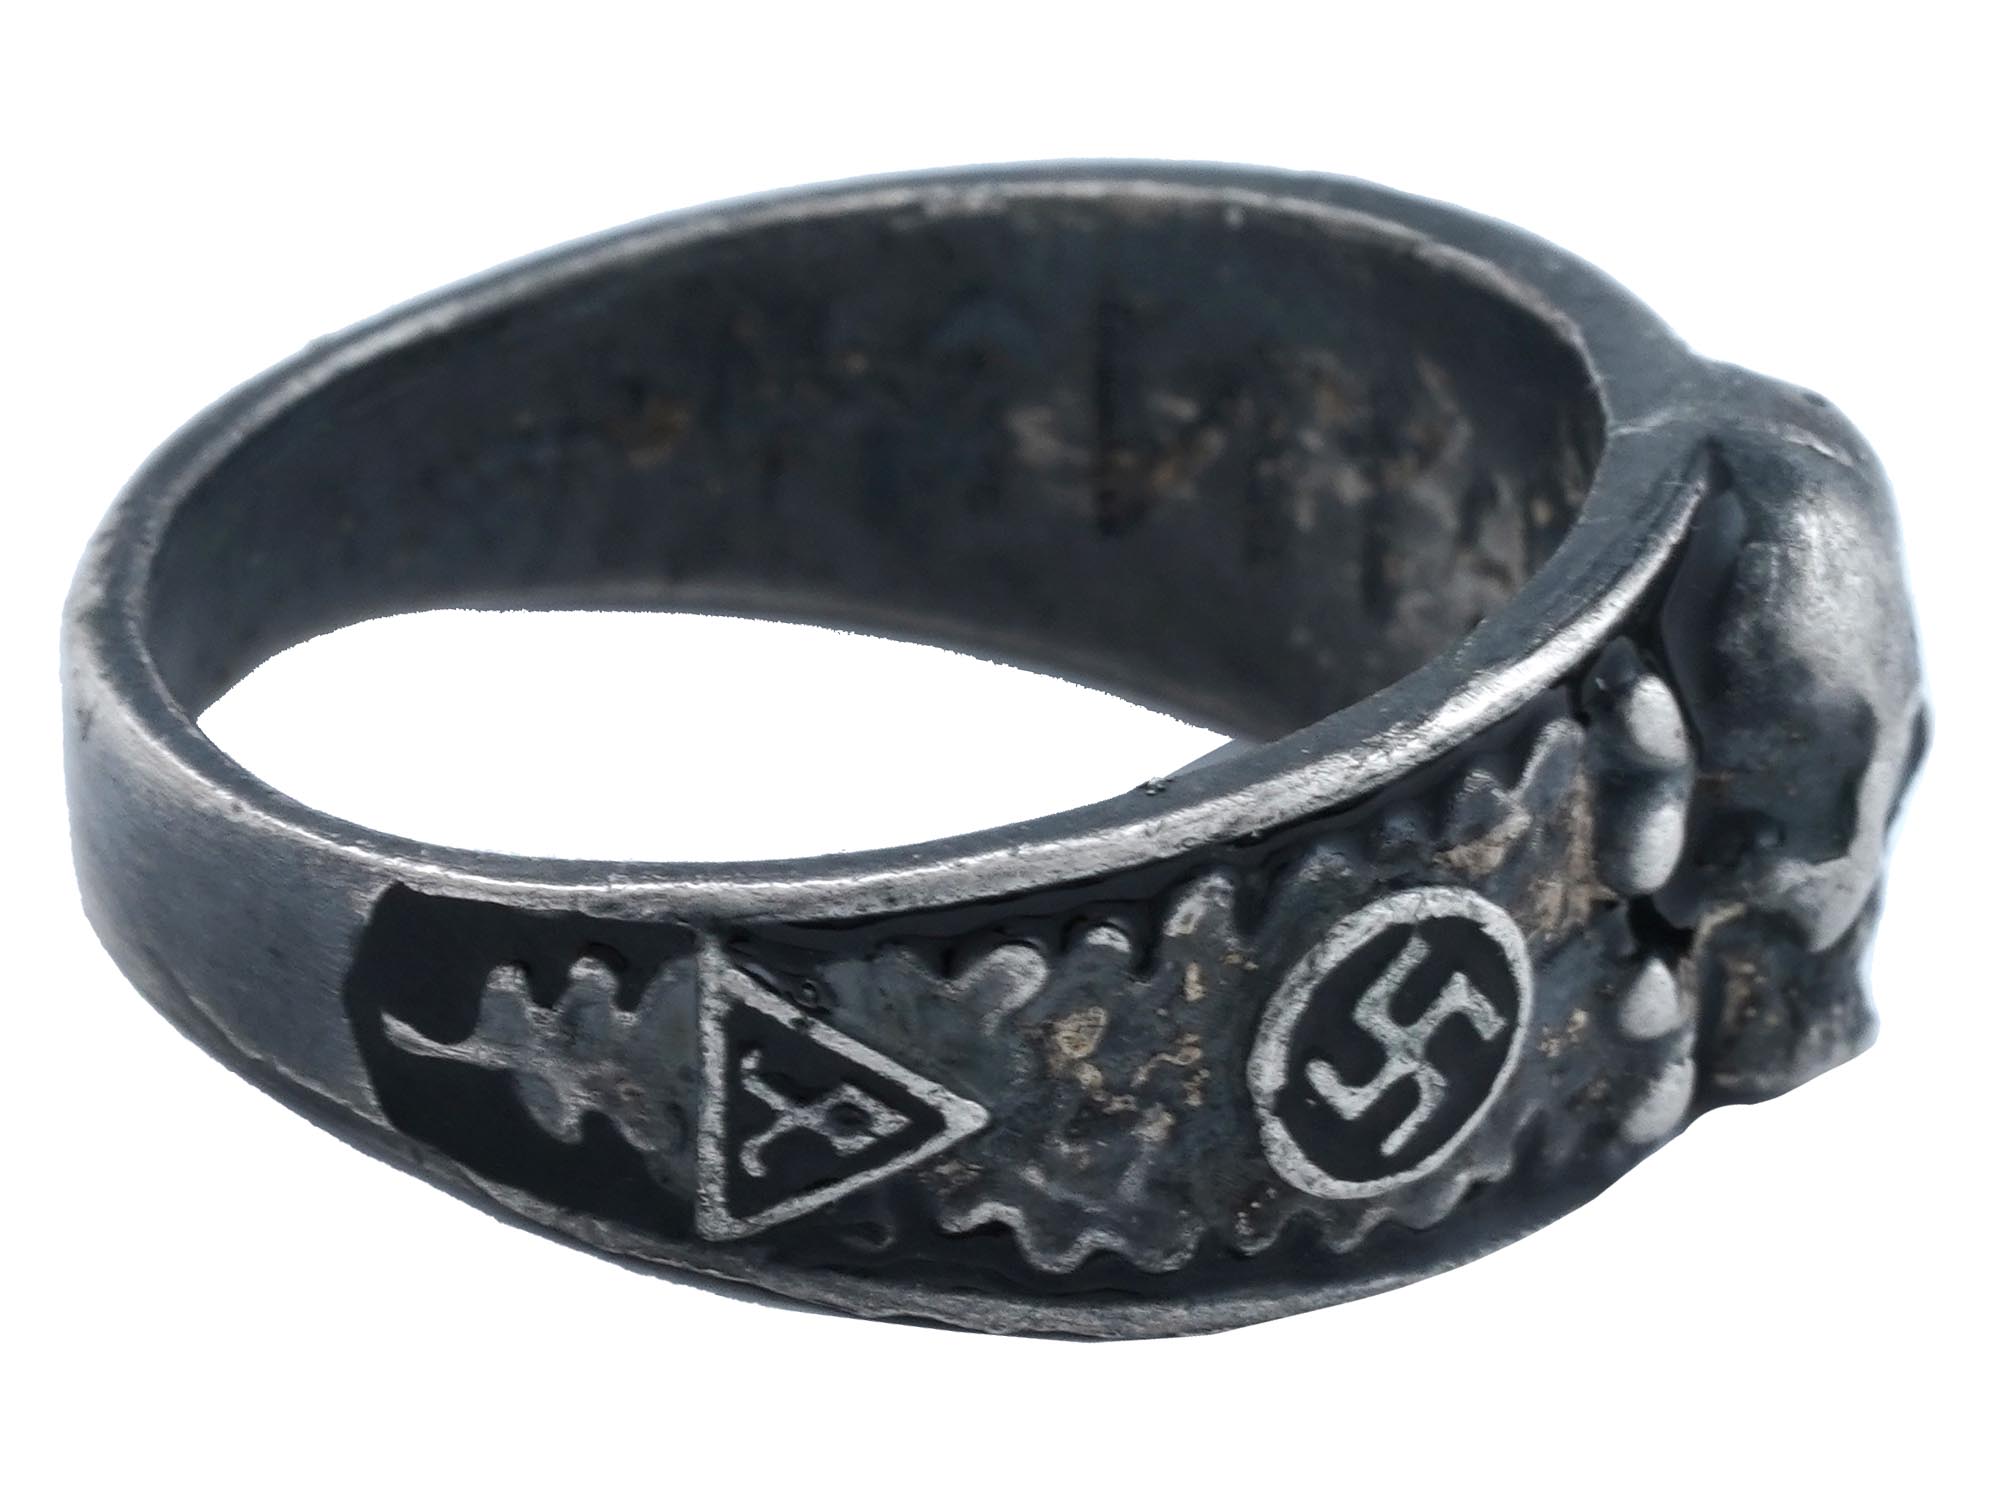 GERMAN WWII SS SECRET SOCIETY AHNENERBE SILVER RING PIC-4